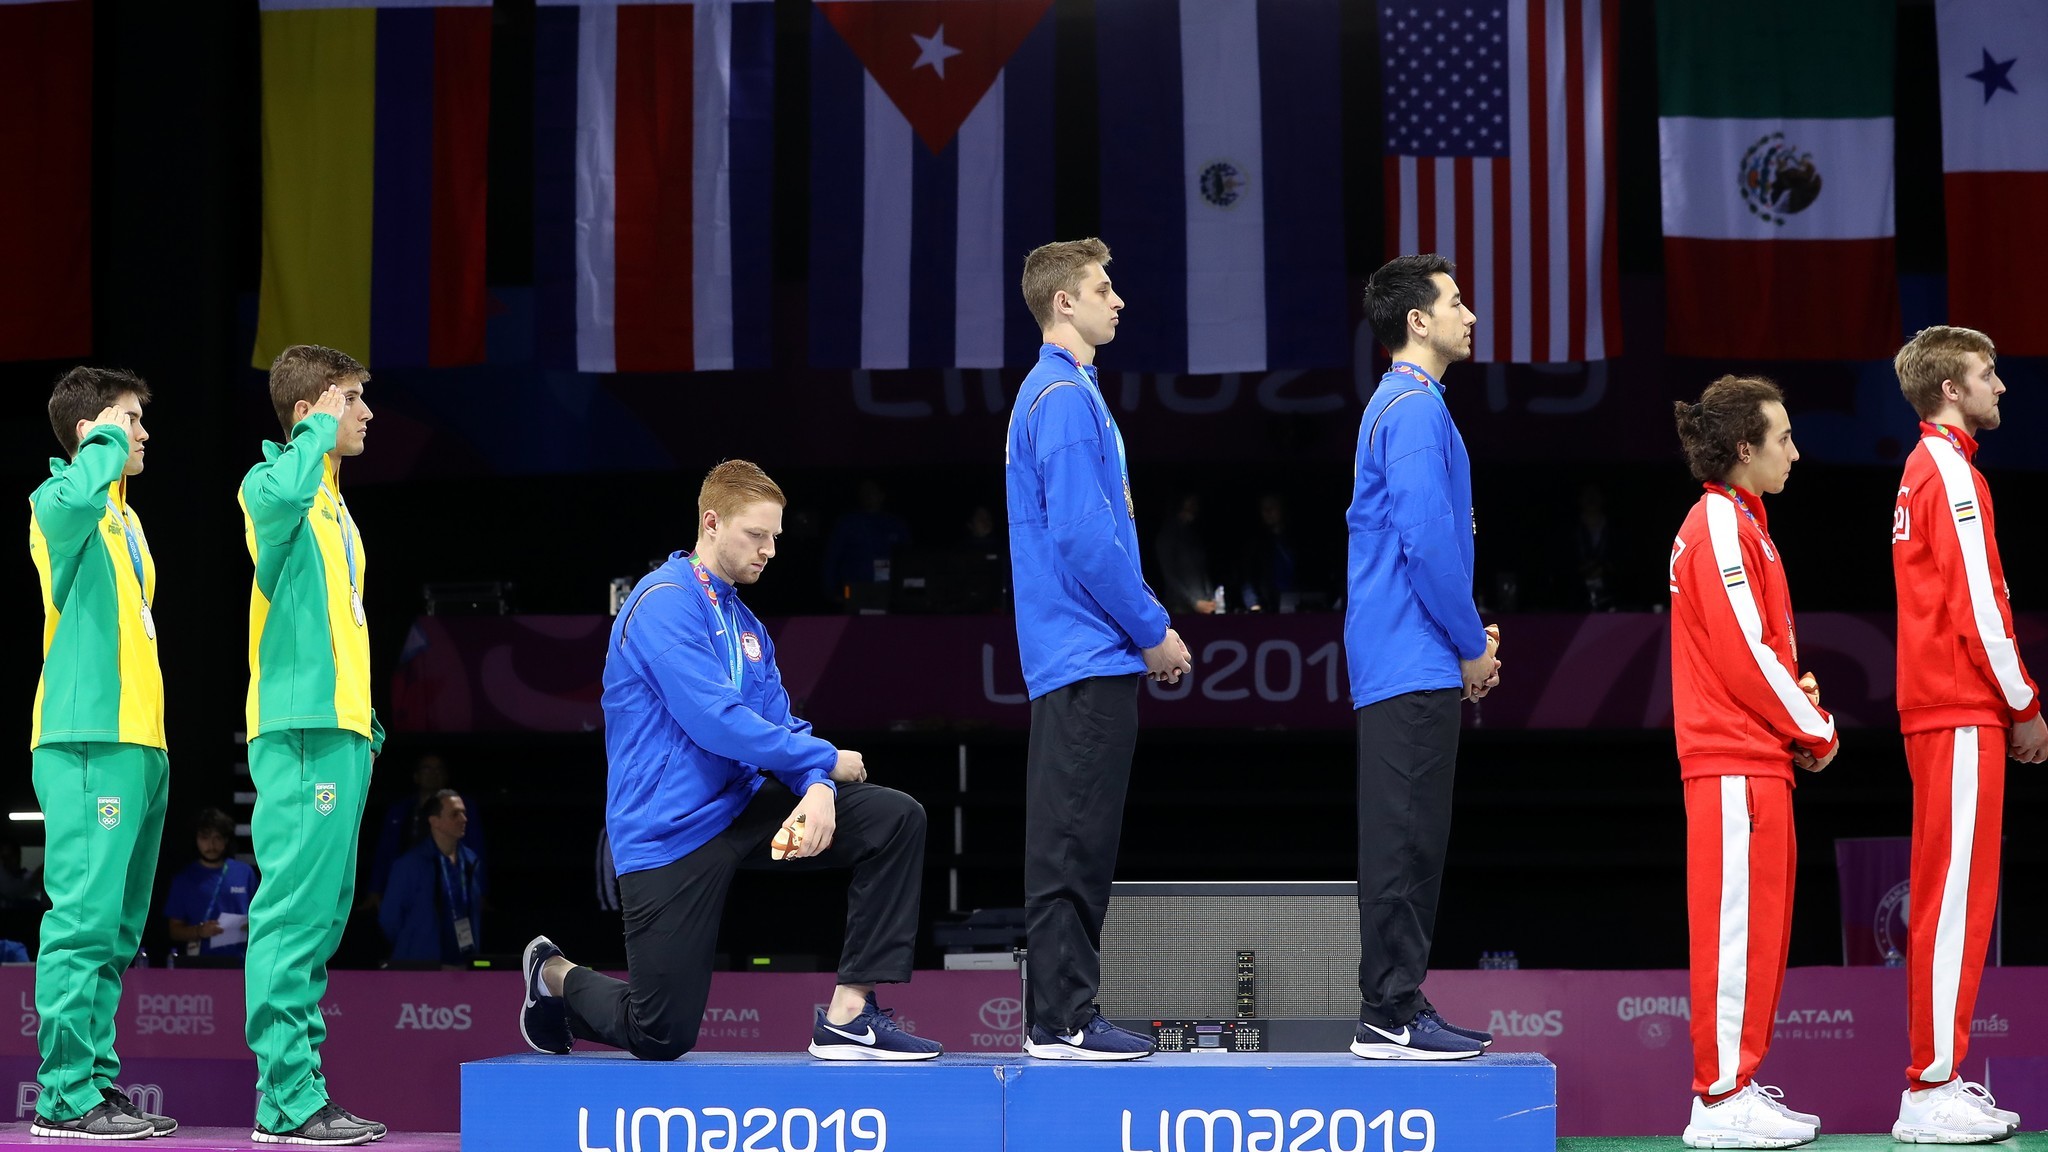 Fencer and hammer thrower kneel, raise fist for anthem at Pan Am Games